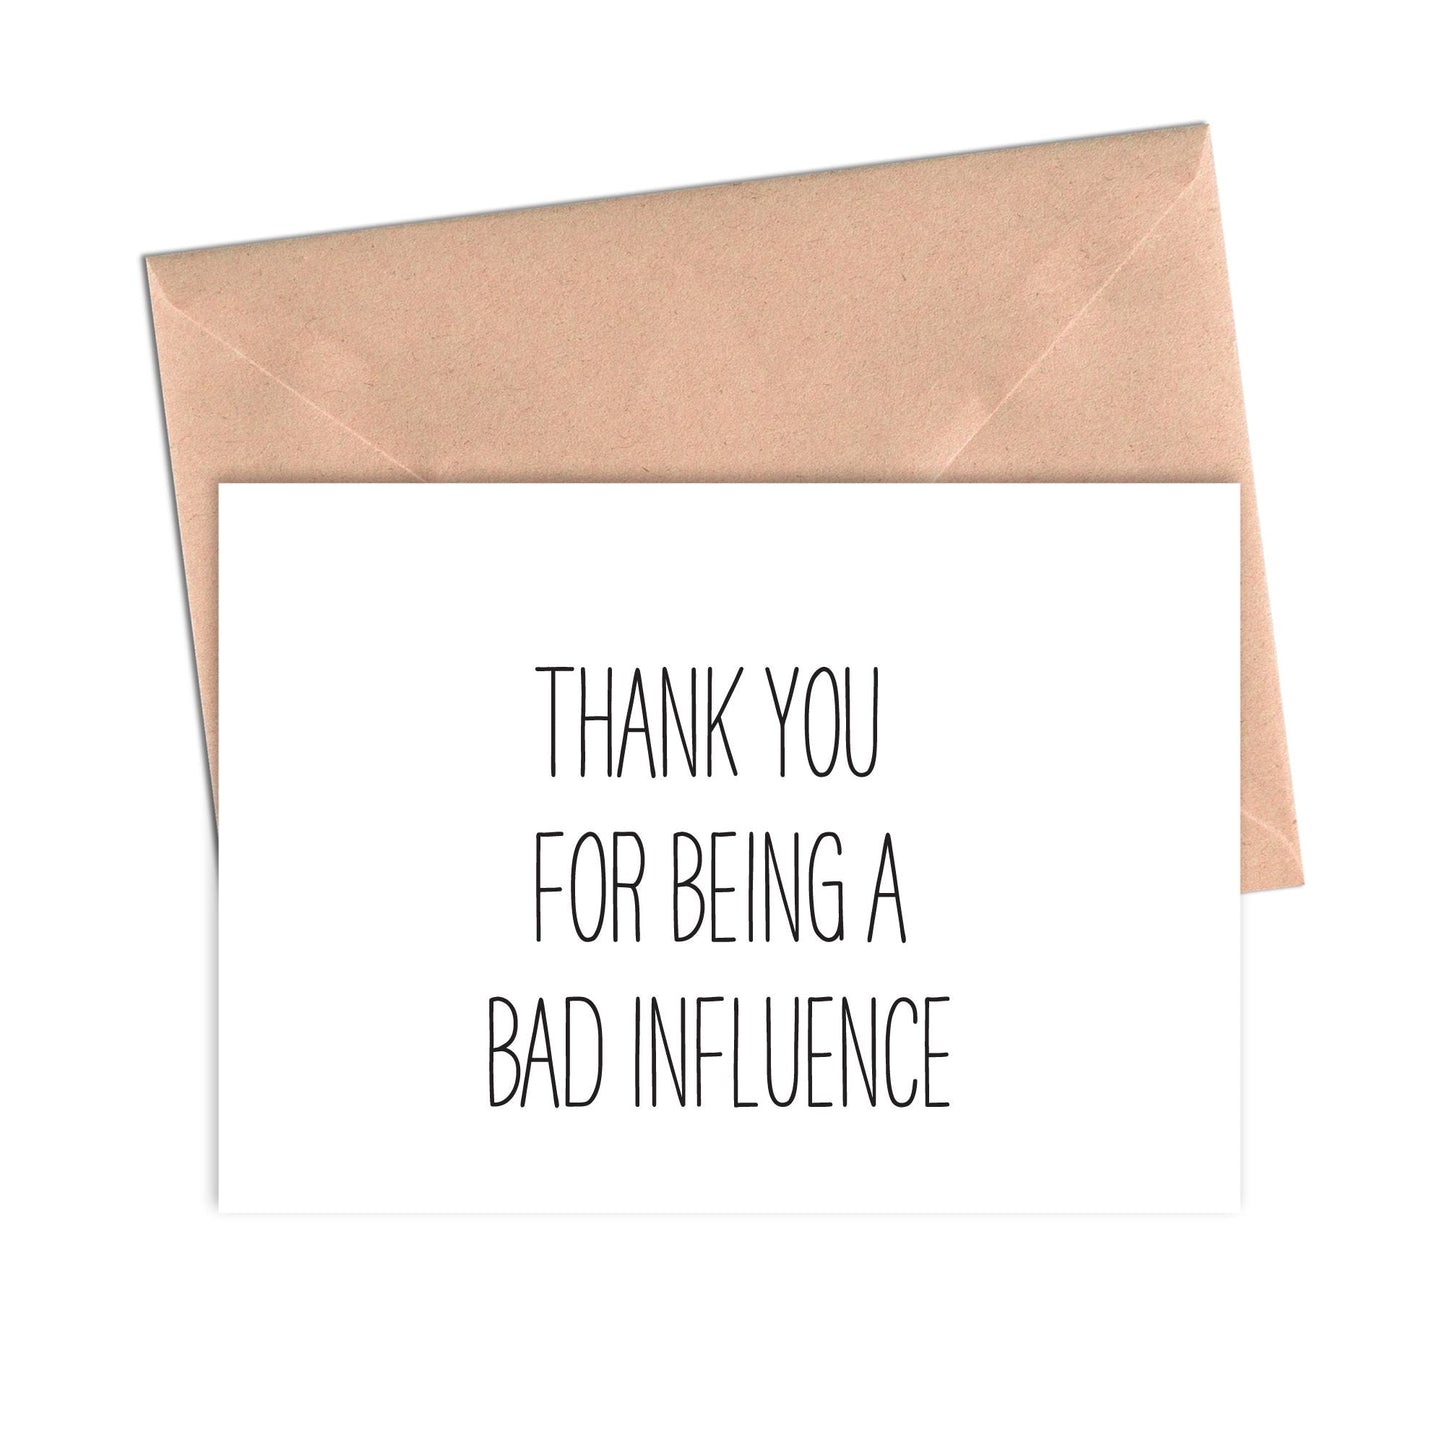 Bad Influence Funny Friendship Card-Friendship Cards-Crimson and Clover Studio